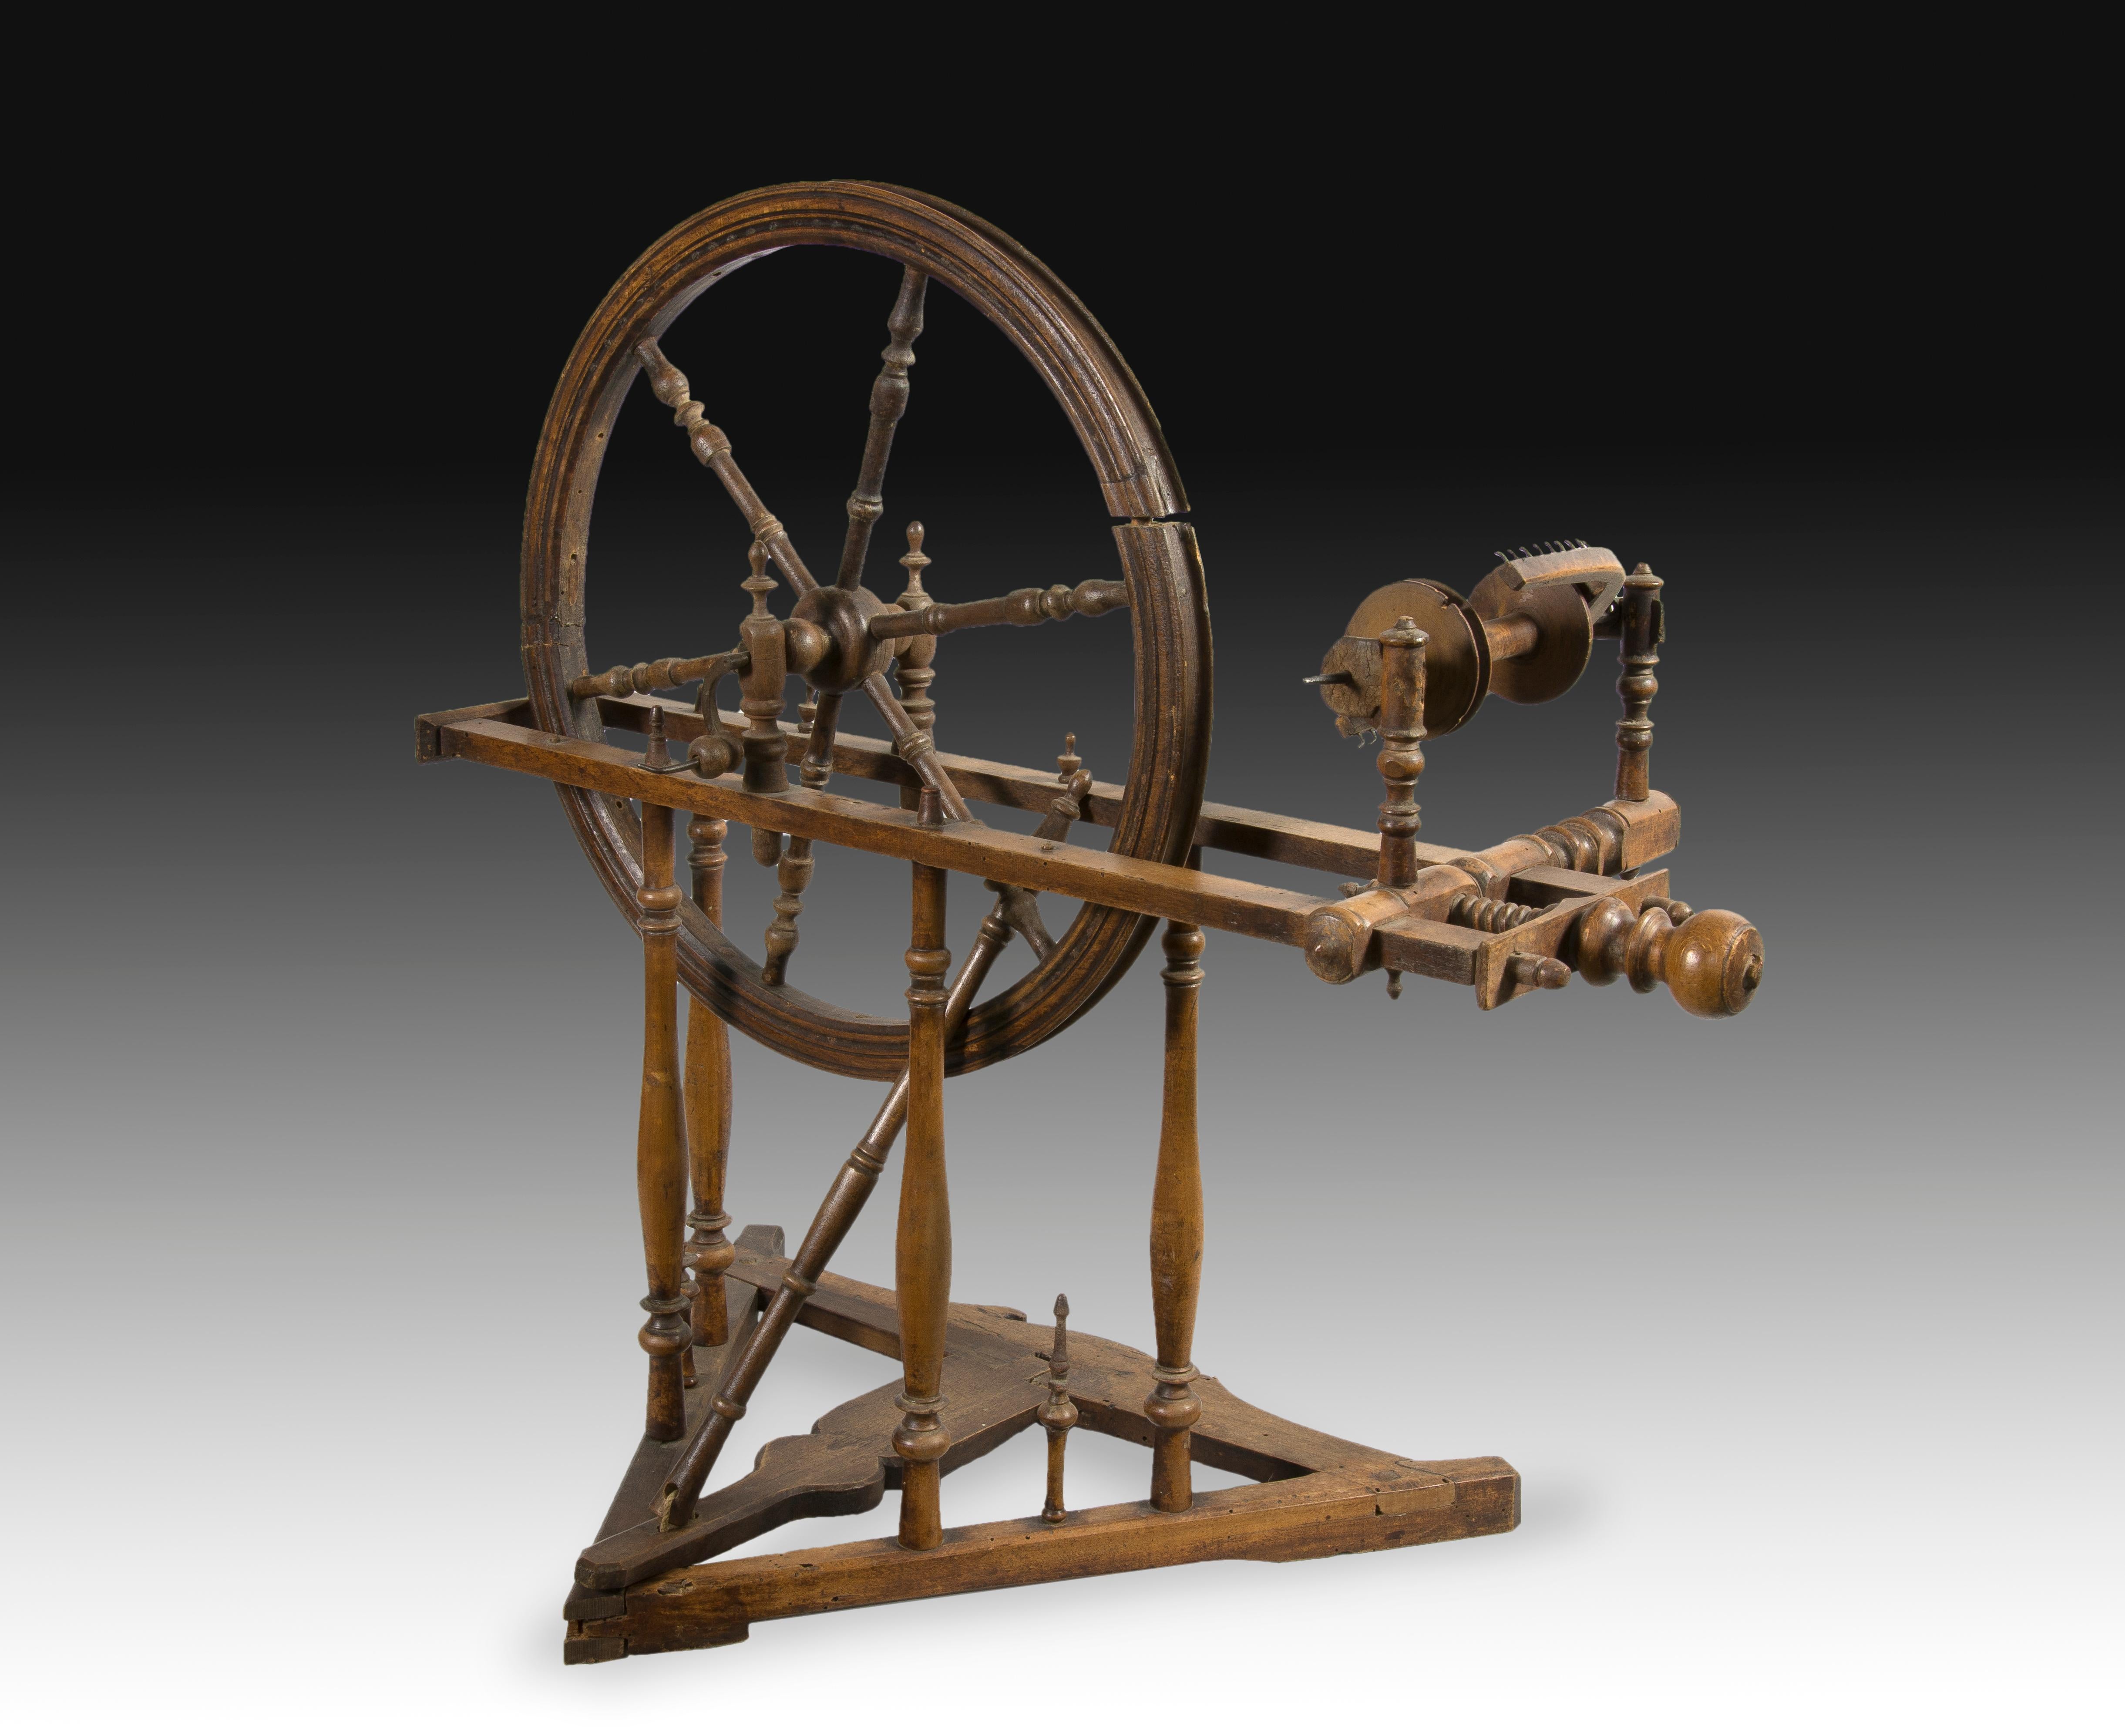 Spinning wheel. Walnut wood carved and turned. XIX century. 
 Vertical carved walnut wood spinning wheel, which has been decorated with fine lines in certain areas, and the use of balustrade pieces one and the other decorated with discs and